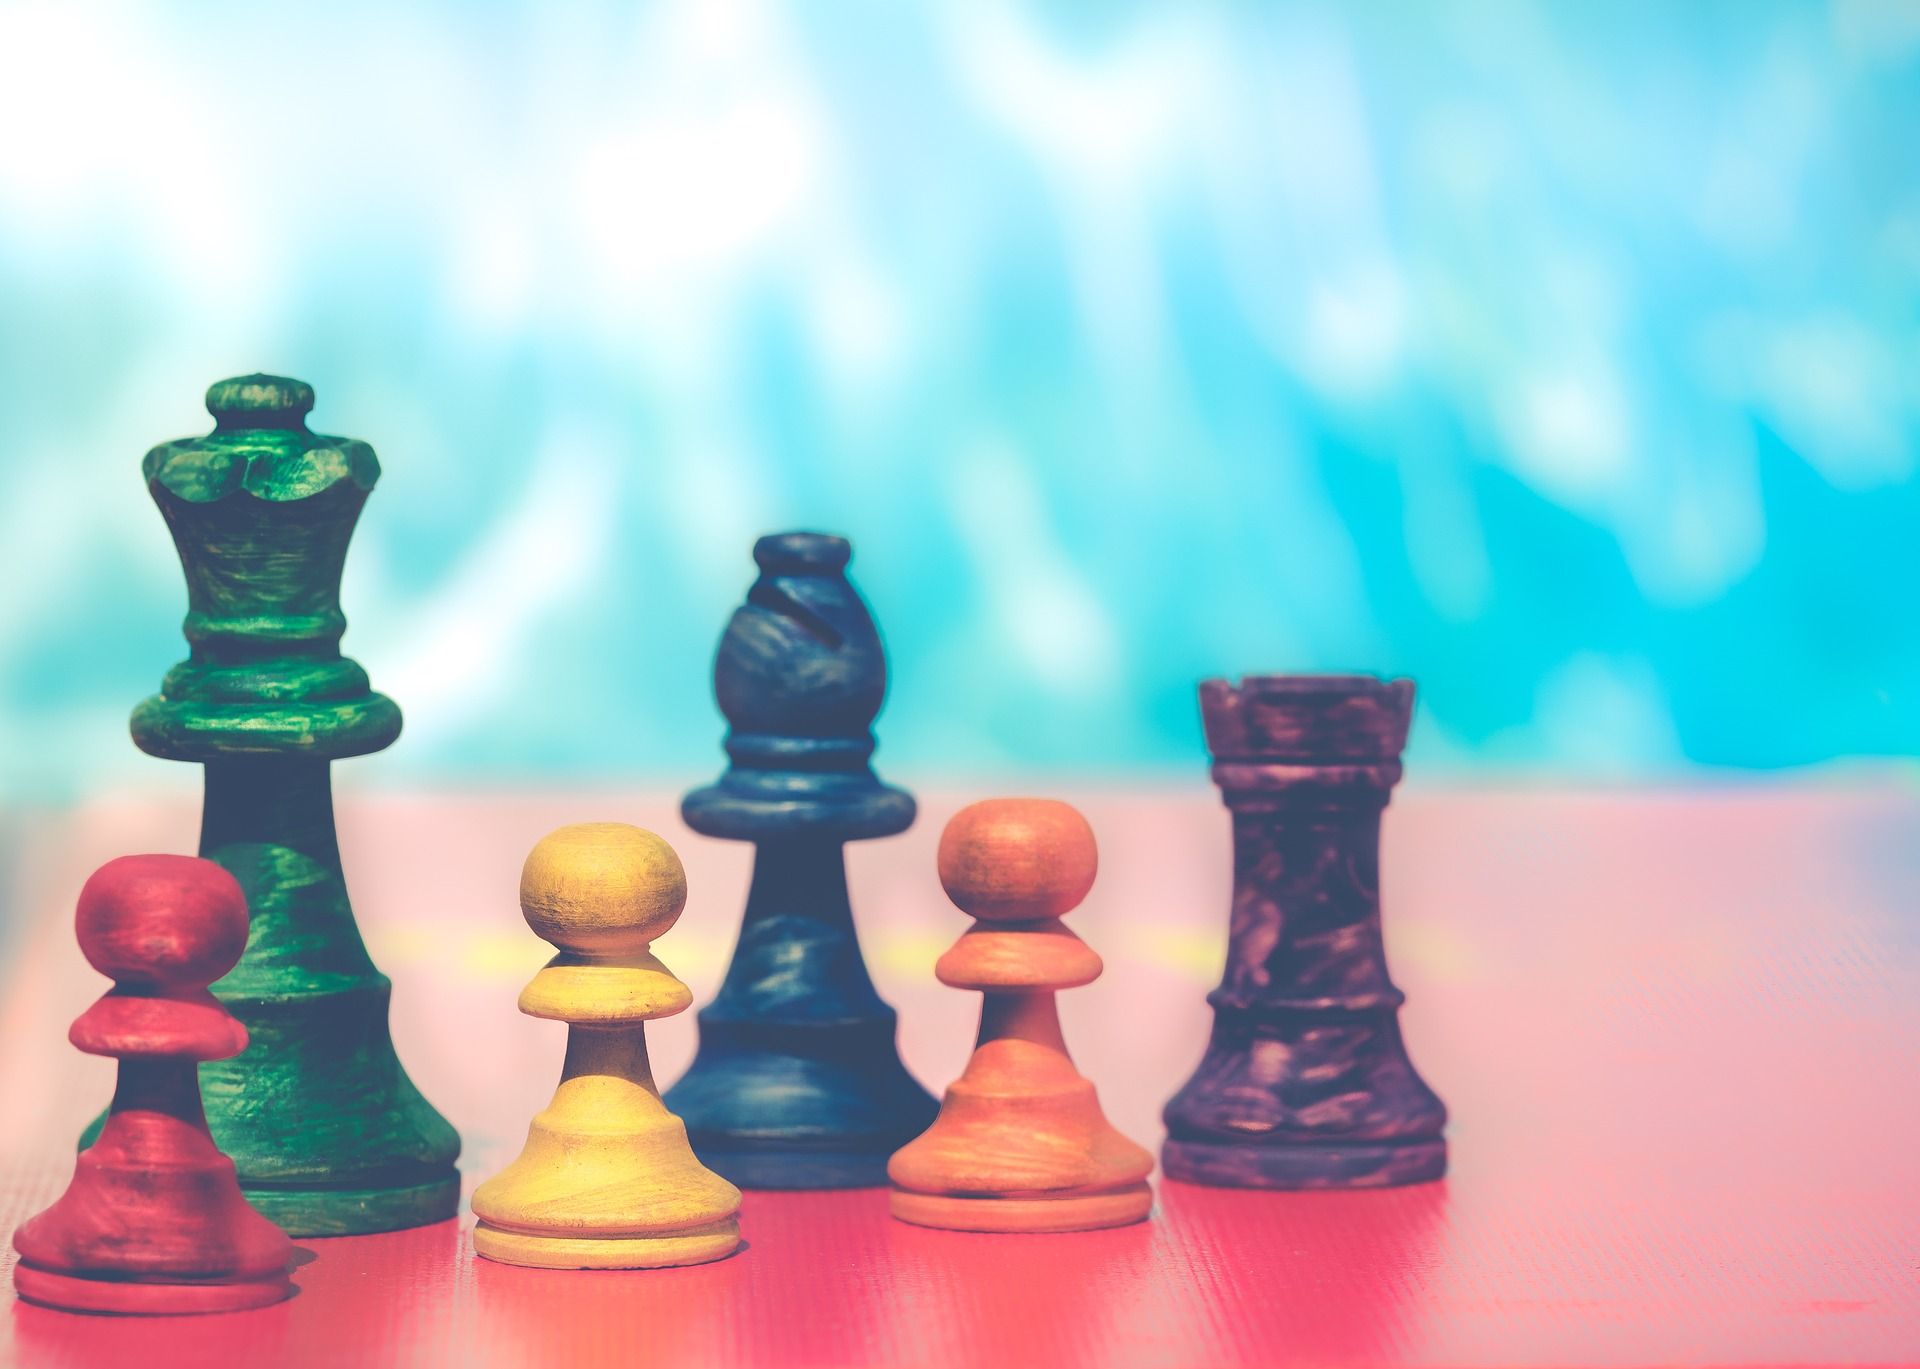 Rainbow colored chess pieces.